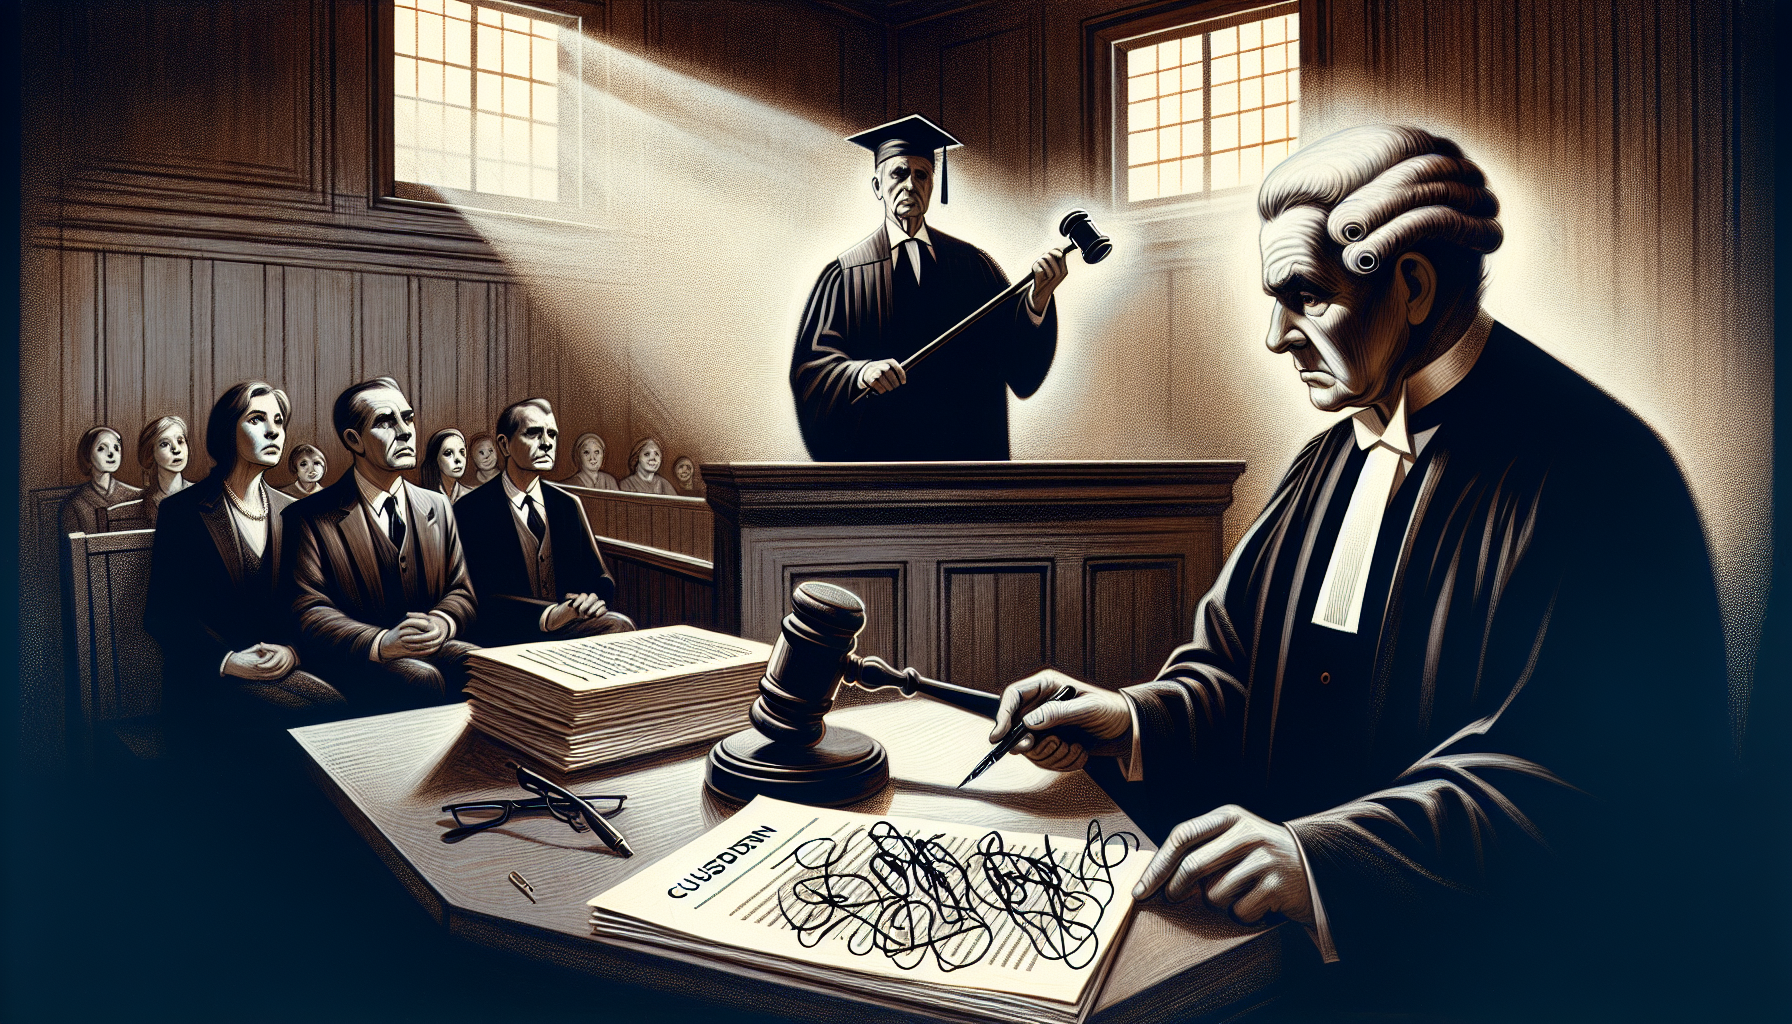 Illustration of court approval for a custody agreement